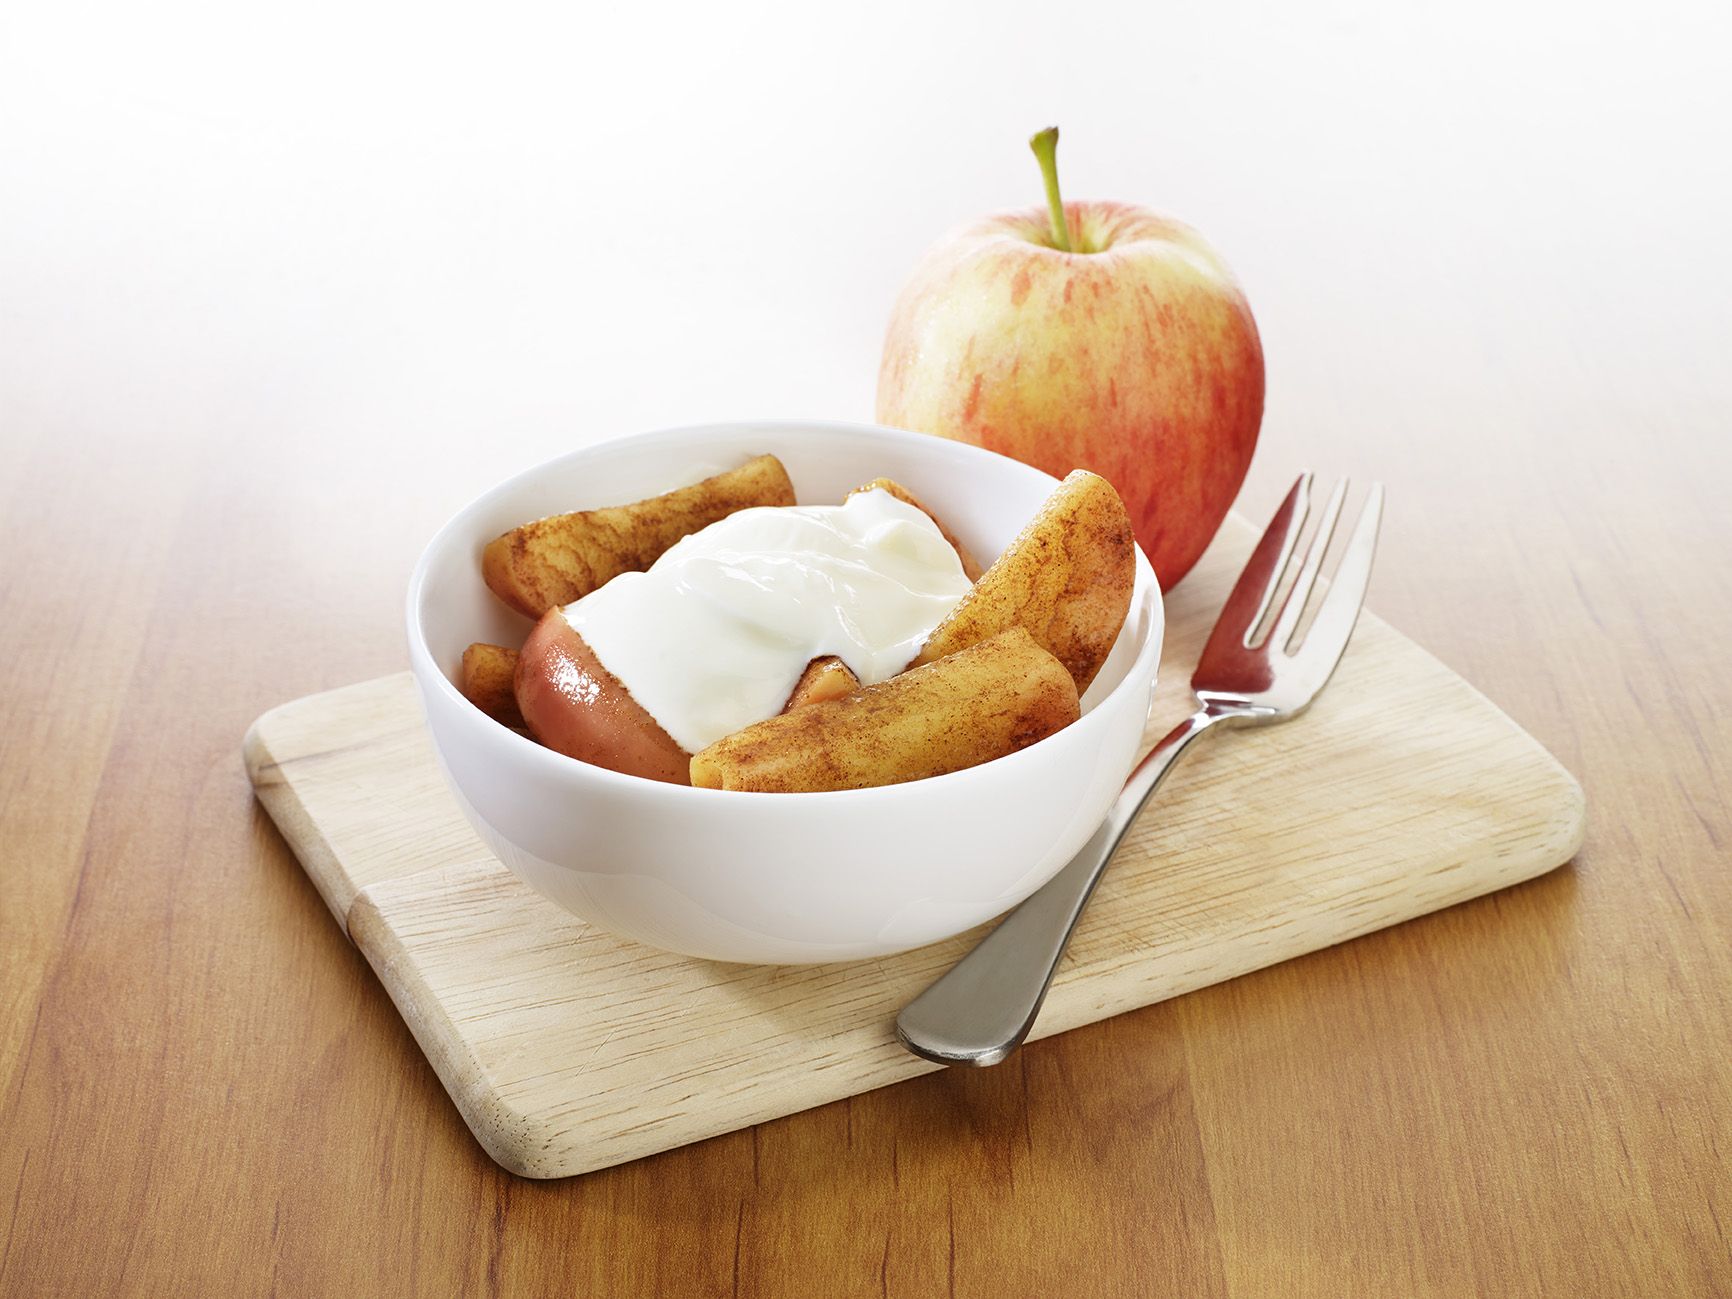 A white ceramic bowl containing sliced apples covered in cinnamon topped with a dollop of yoghurt. A whole apple sits in the background.